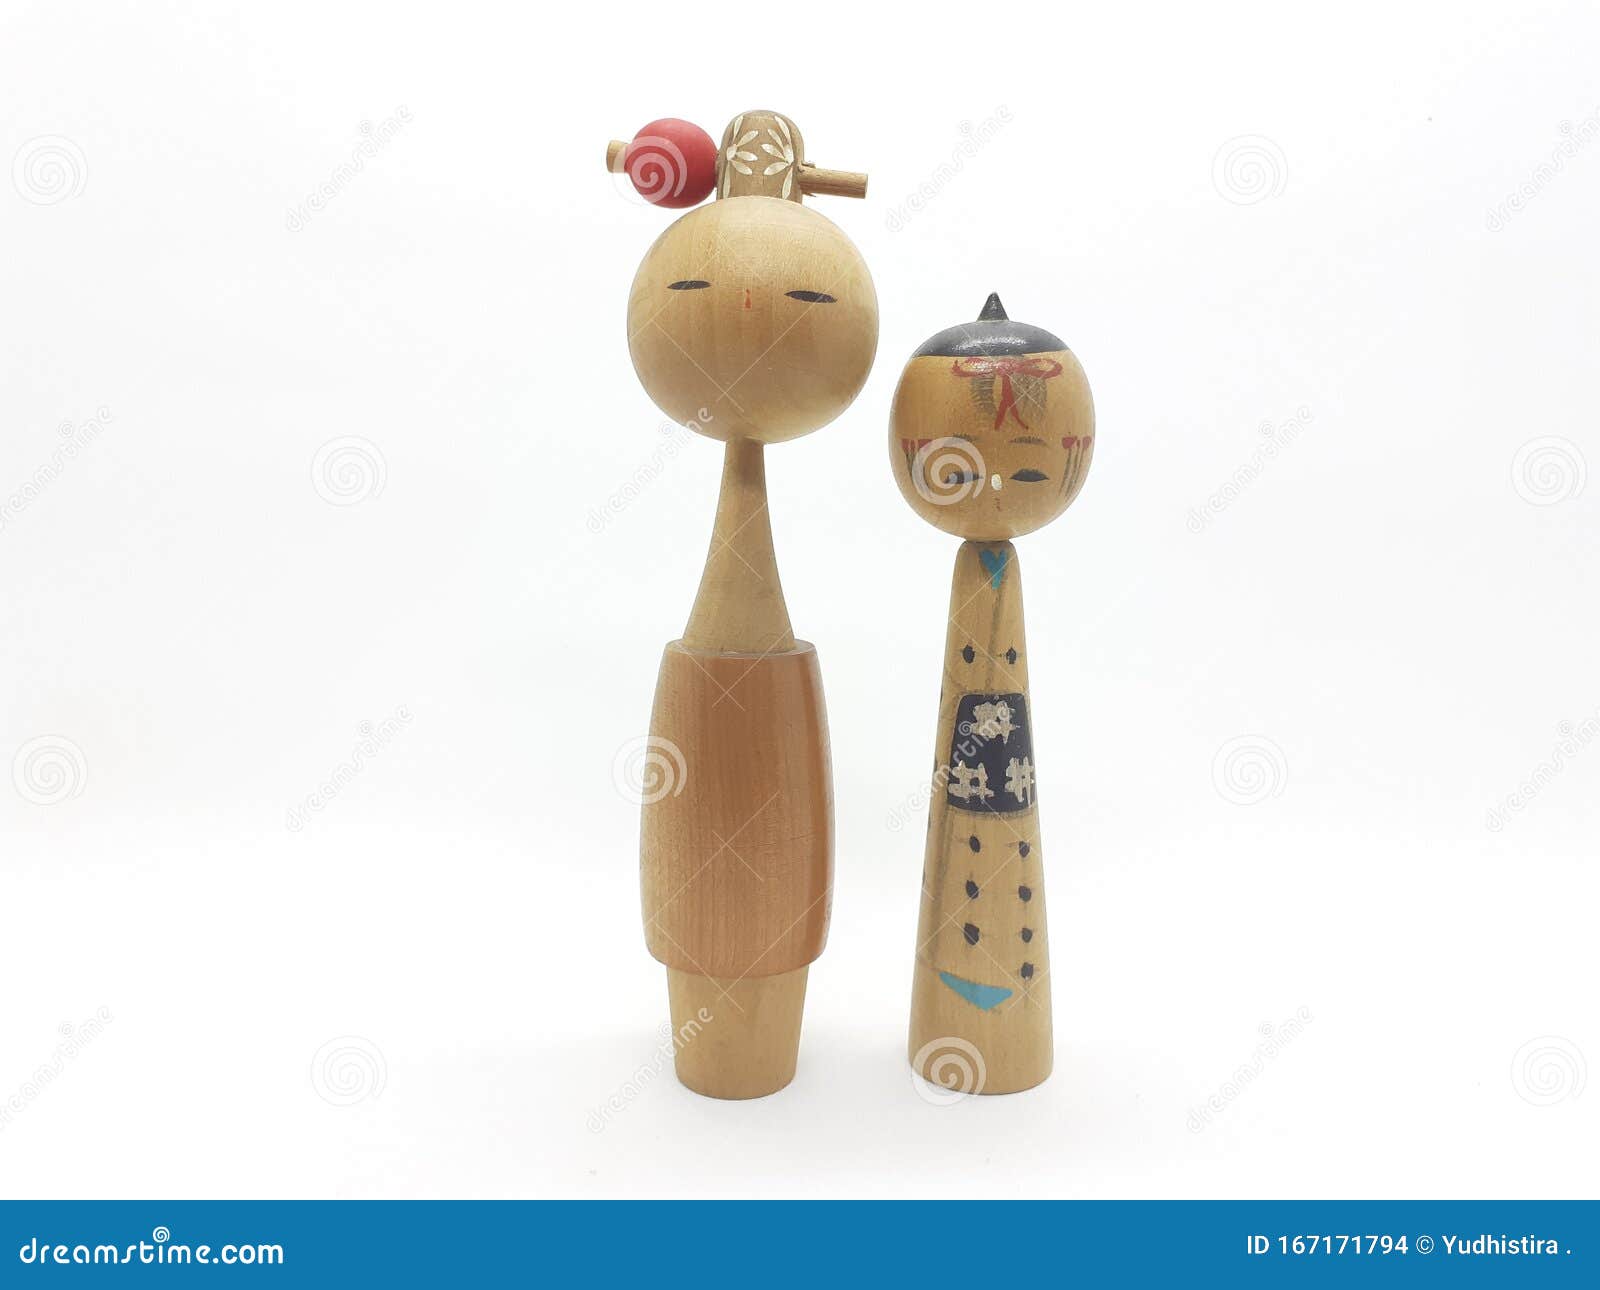 traditional japanese wooden toys